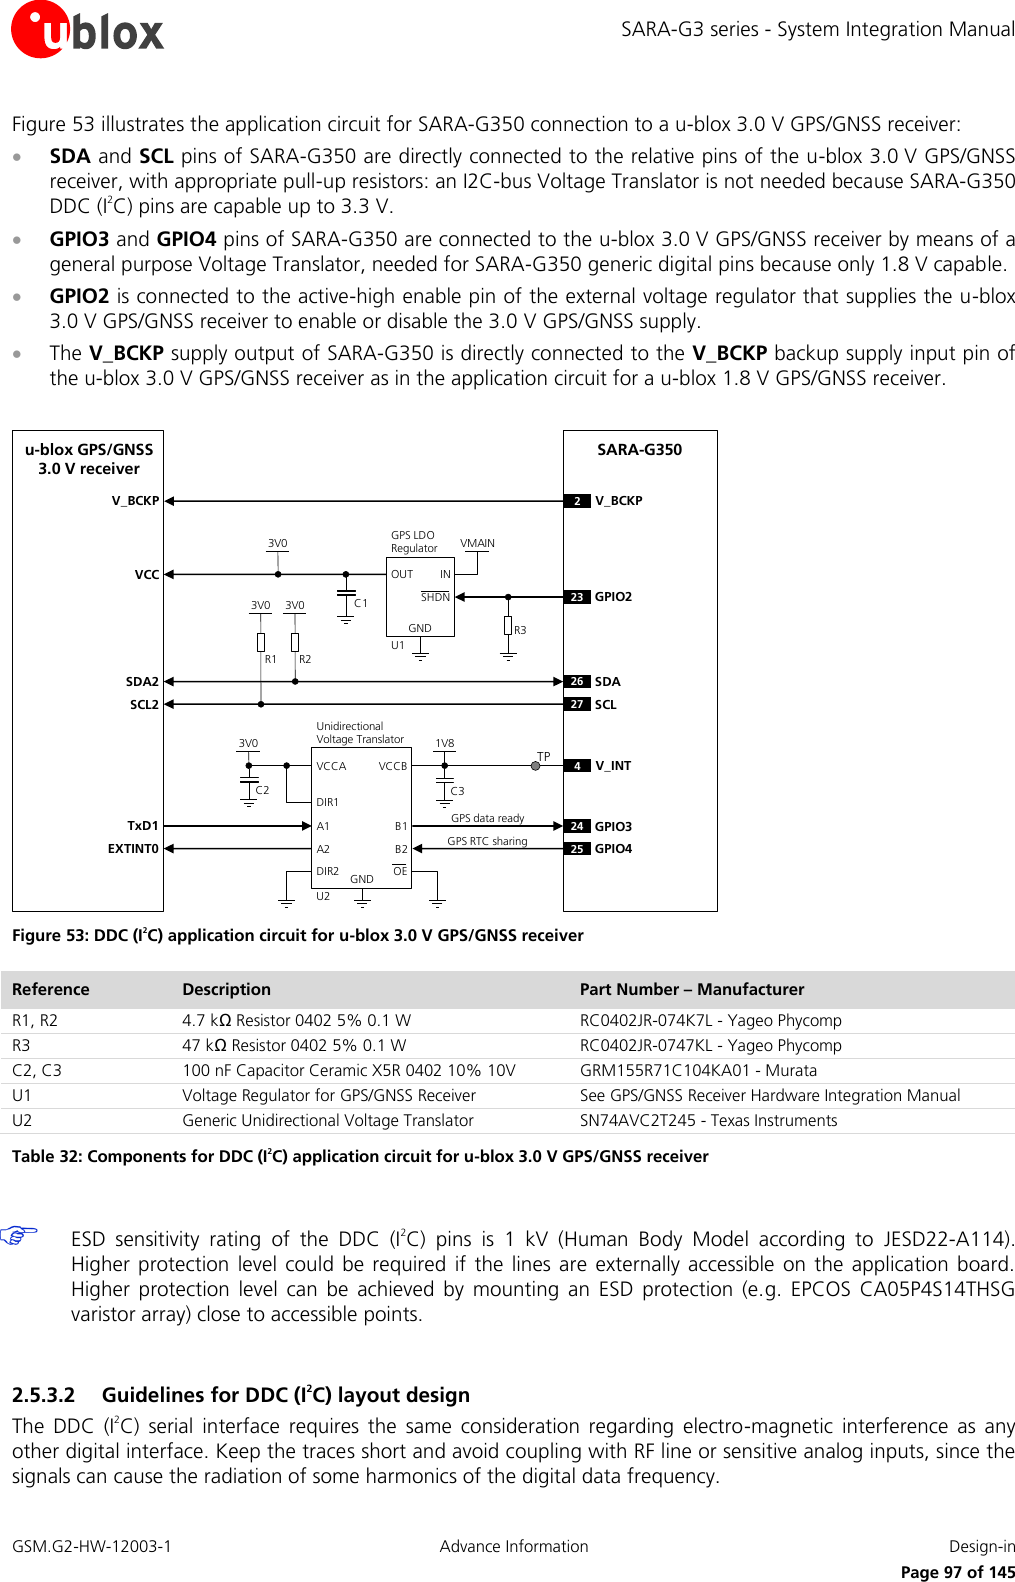 SARA-G3 series - System Integration Manual GSM.G2-HW-12003-1  Advance Information  Design-in     Page 97 of 145 Figure 53 illustrates the application circuit for SARA-G350 connection to a u-blox 3.0 V GPS/GNSS receiver:  SDA and SCL pins of SARA-G350 are directly connected to the relative pins of the u-blox 3.0 V GPS/GNSS receiver, with appropriate pull-up resistors: an I2C-bus Voltage Translator is not needed because SARA-G350 DDC (I2C) pins are capable up to 3.3 V.  GPIO3 and GPIO4 pins of SARA-G350 are connected to the u-blox 3.0 V GPS/GNSS receiver by means of a general purpose Voltage Translator, needed for SARA-G350 generic digital pins because only 1.8 V capable.  GPIO2 is connected to the active-high enable pin of the external voltage regulator that supplies the u-blox 3.0 V GPS/GNSS receiver to enable or disable the 3.0 V GPS/GNSS supply.  The V_BCKP supply output of SARA-G350 is directly connected to the V_BCKP backup supply input pin of the u-blox 3.0 V GPS/GNSS receiver as in the application circuit for a u-blox 1.8 V GPS/GNSS receiver.  SARA-G350R1INOUTGNDGPS LDORegulatorSHDNu-blox GPS/GNSS3.0 V receiverSDA2SCL2R23V0 3V0VMAIN3V0U123 GPIO2SDASCLC12627VCCR3V_BCKP V_BCKP224 GPIO325 GPIO41V8B1 A1GNDU2B2A2VCCBVCCAUnidirectionalVoltage TranslatorC2 C33V0TxD1EXTINT04V_INTDIR1DIR2 OEGPS data readyGPS RTC sharingTP Figure 53: DDC (I2C) application circuit for u-blox 3.0 V GPS/GNSS receiver Reference Description Part Number – Manufacturer R1, R2 4.7 kΩ Resistor 0402 5% 0.1 W  RC0402JR-074K7L - Yageo Phycomp R3 47 kΩ Resistor 0402 5% 0.1 W  RC0402JR-0747KL - Yageo Phycomp C2, C3 100 nF Capacitor Ceramic X5R 0402 10% 10V GRM155R71C104KA01 - Murata U1 Voltage Regulator for GPS/GNSS Receiver See GPS/GNSS Receiver Hardware Integration Manual U2 Generic Unidirectional Voltage Translator SN74AVC2T245 - Texas Instruments Table 32: Components for DDC (I2C) application circuit for u-blox 3.0 V GPS/GNSS receiver   ESD  sensitivity  rating  of  the  DDC  (I2C)  pins  is  1  kV  (Human  Body  Model  according  to  JESD22-A114). Higher  protection  level could be  required  if  the lines  are externally accessible on  the  application  board. Higher  protection  level  can  be  achieved  by  mounting  an  ESD  protection  (e.g.  EPCOS  CA05P4S14THSG varistor array) close to accessible points.  2.5.3.2 Guidelines for DDC (I2C) layout design The  DDC  (I2C)  serial  interface  requires  the  same  consideration  regarding  electro-magnetic  interference  as  any other digital interface. Keep the traces short and avoid coupling with RF line or sensitive analog inputs, since the signals can cause the radiation of some harmonics of the digital data frequency. 